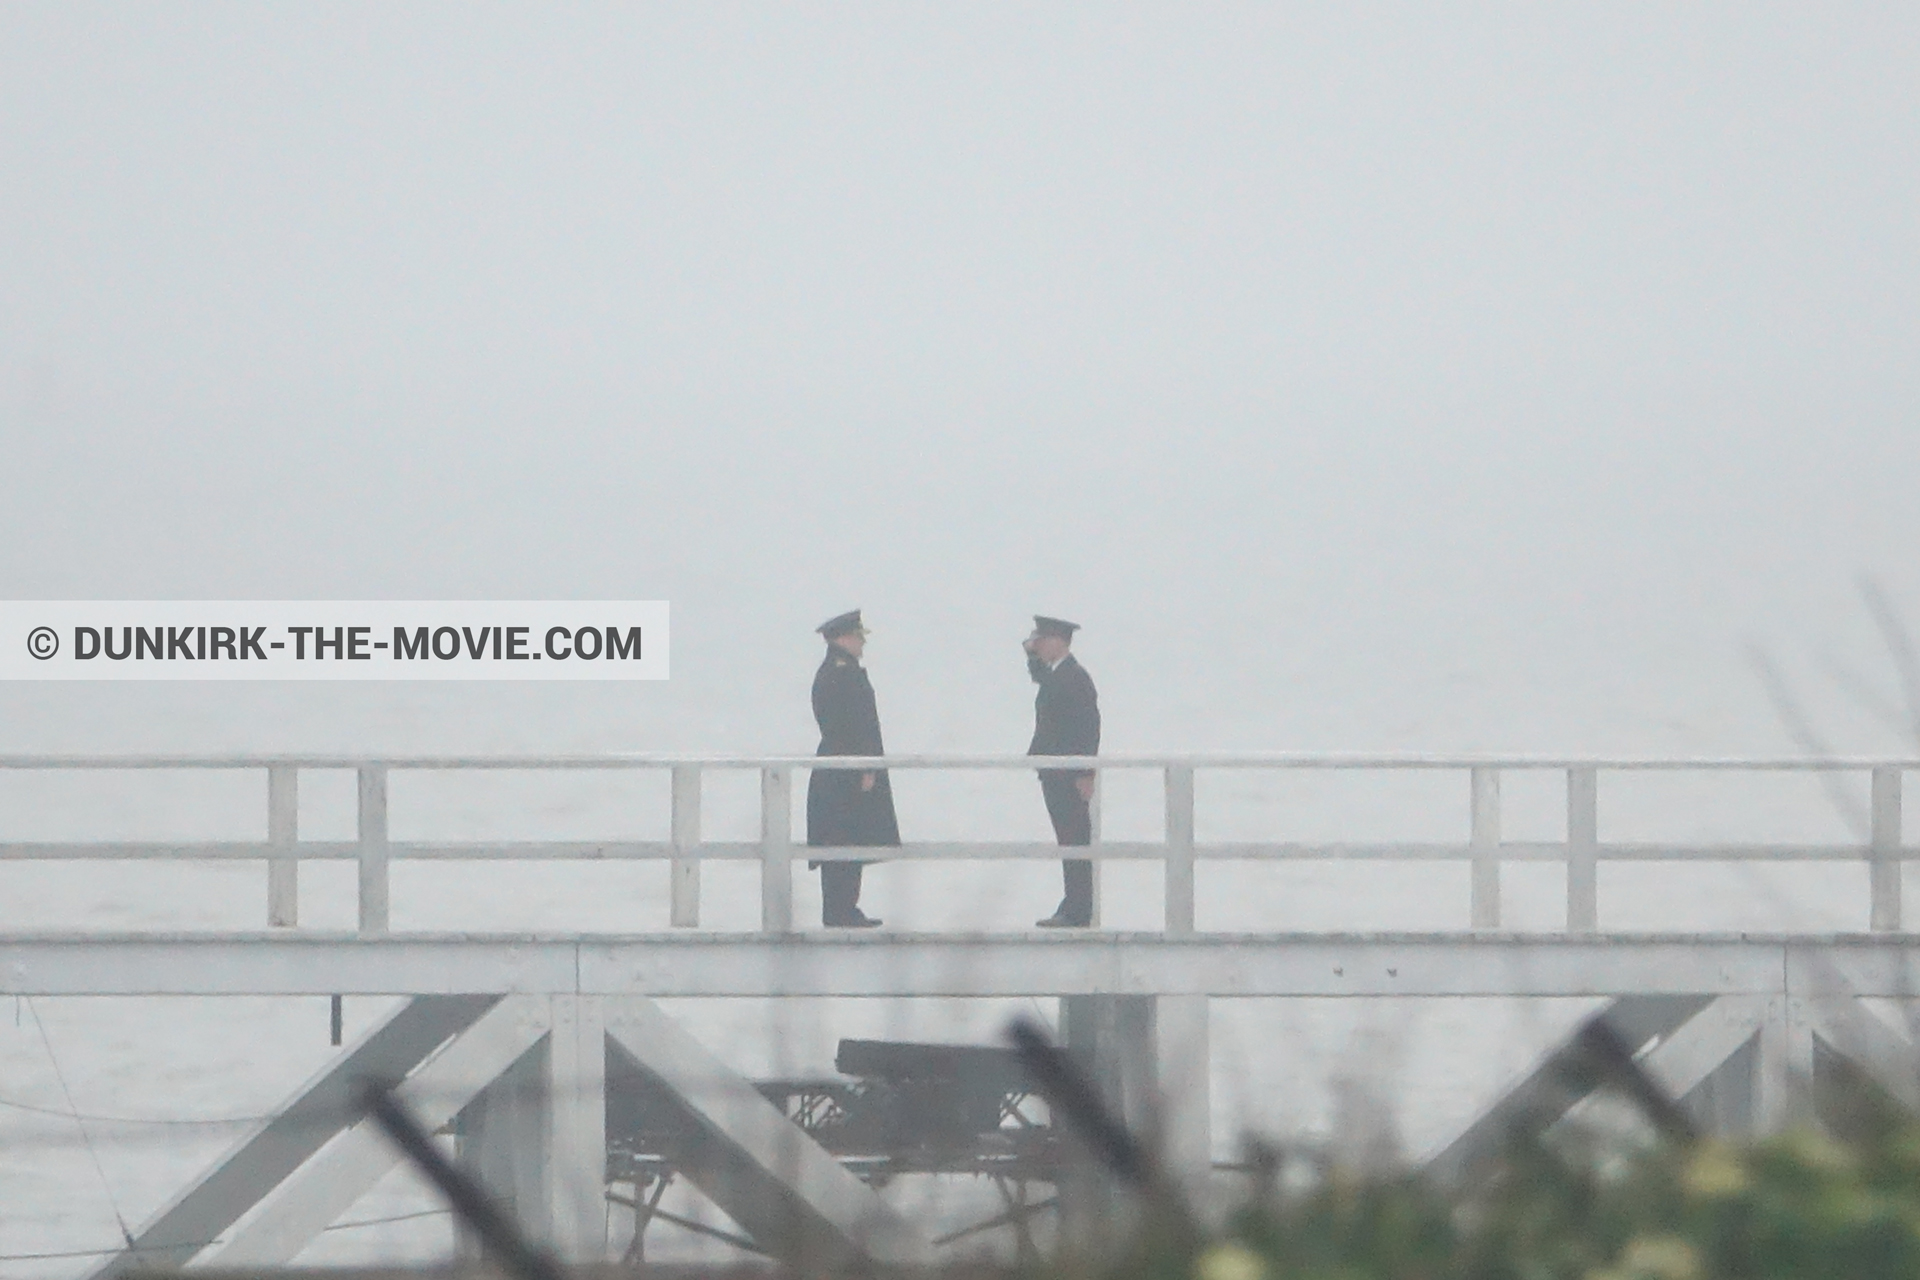 Picture with actor, grey sky, EST pier,  from behind the scene of the Dunkirk movie by Nolan